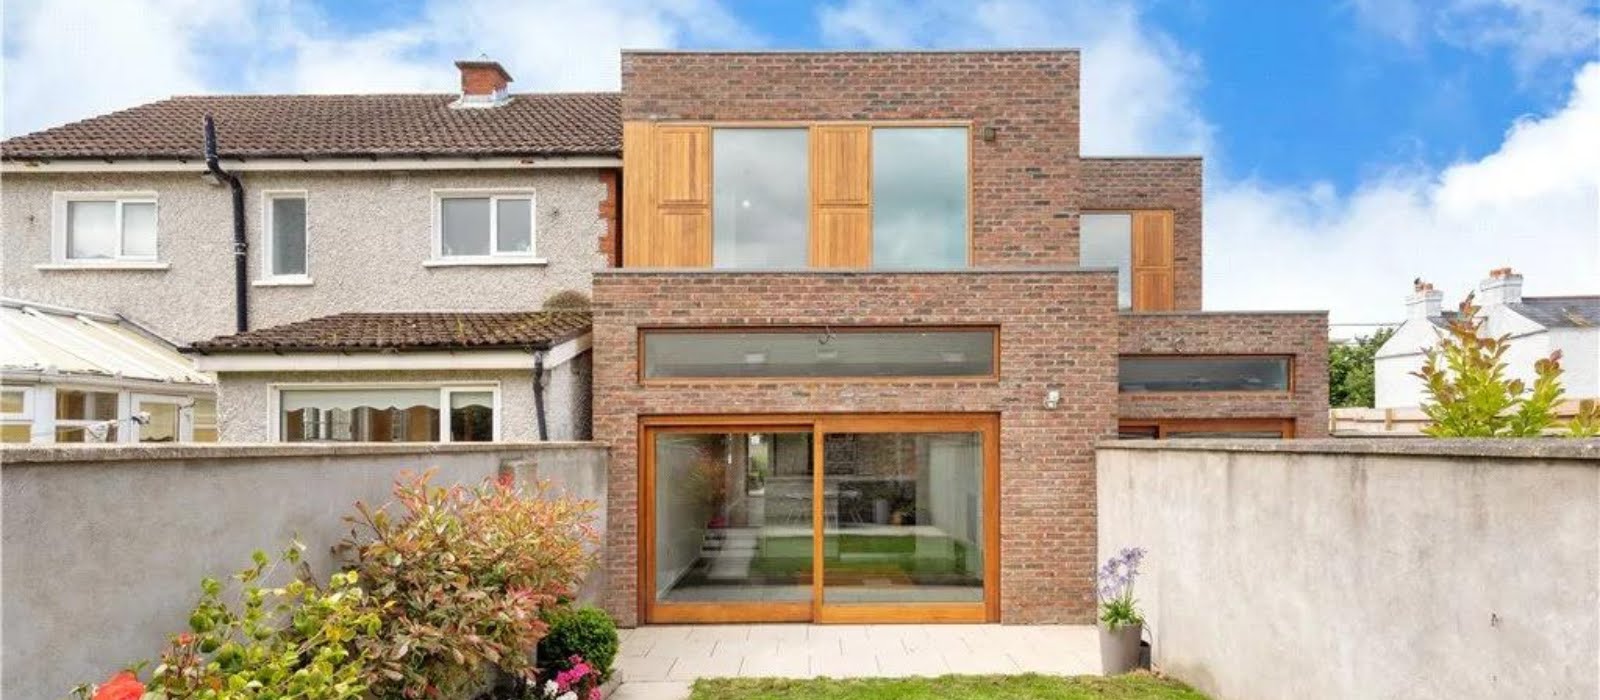 This innovative Monkstown red brick is on the market for €750,000